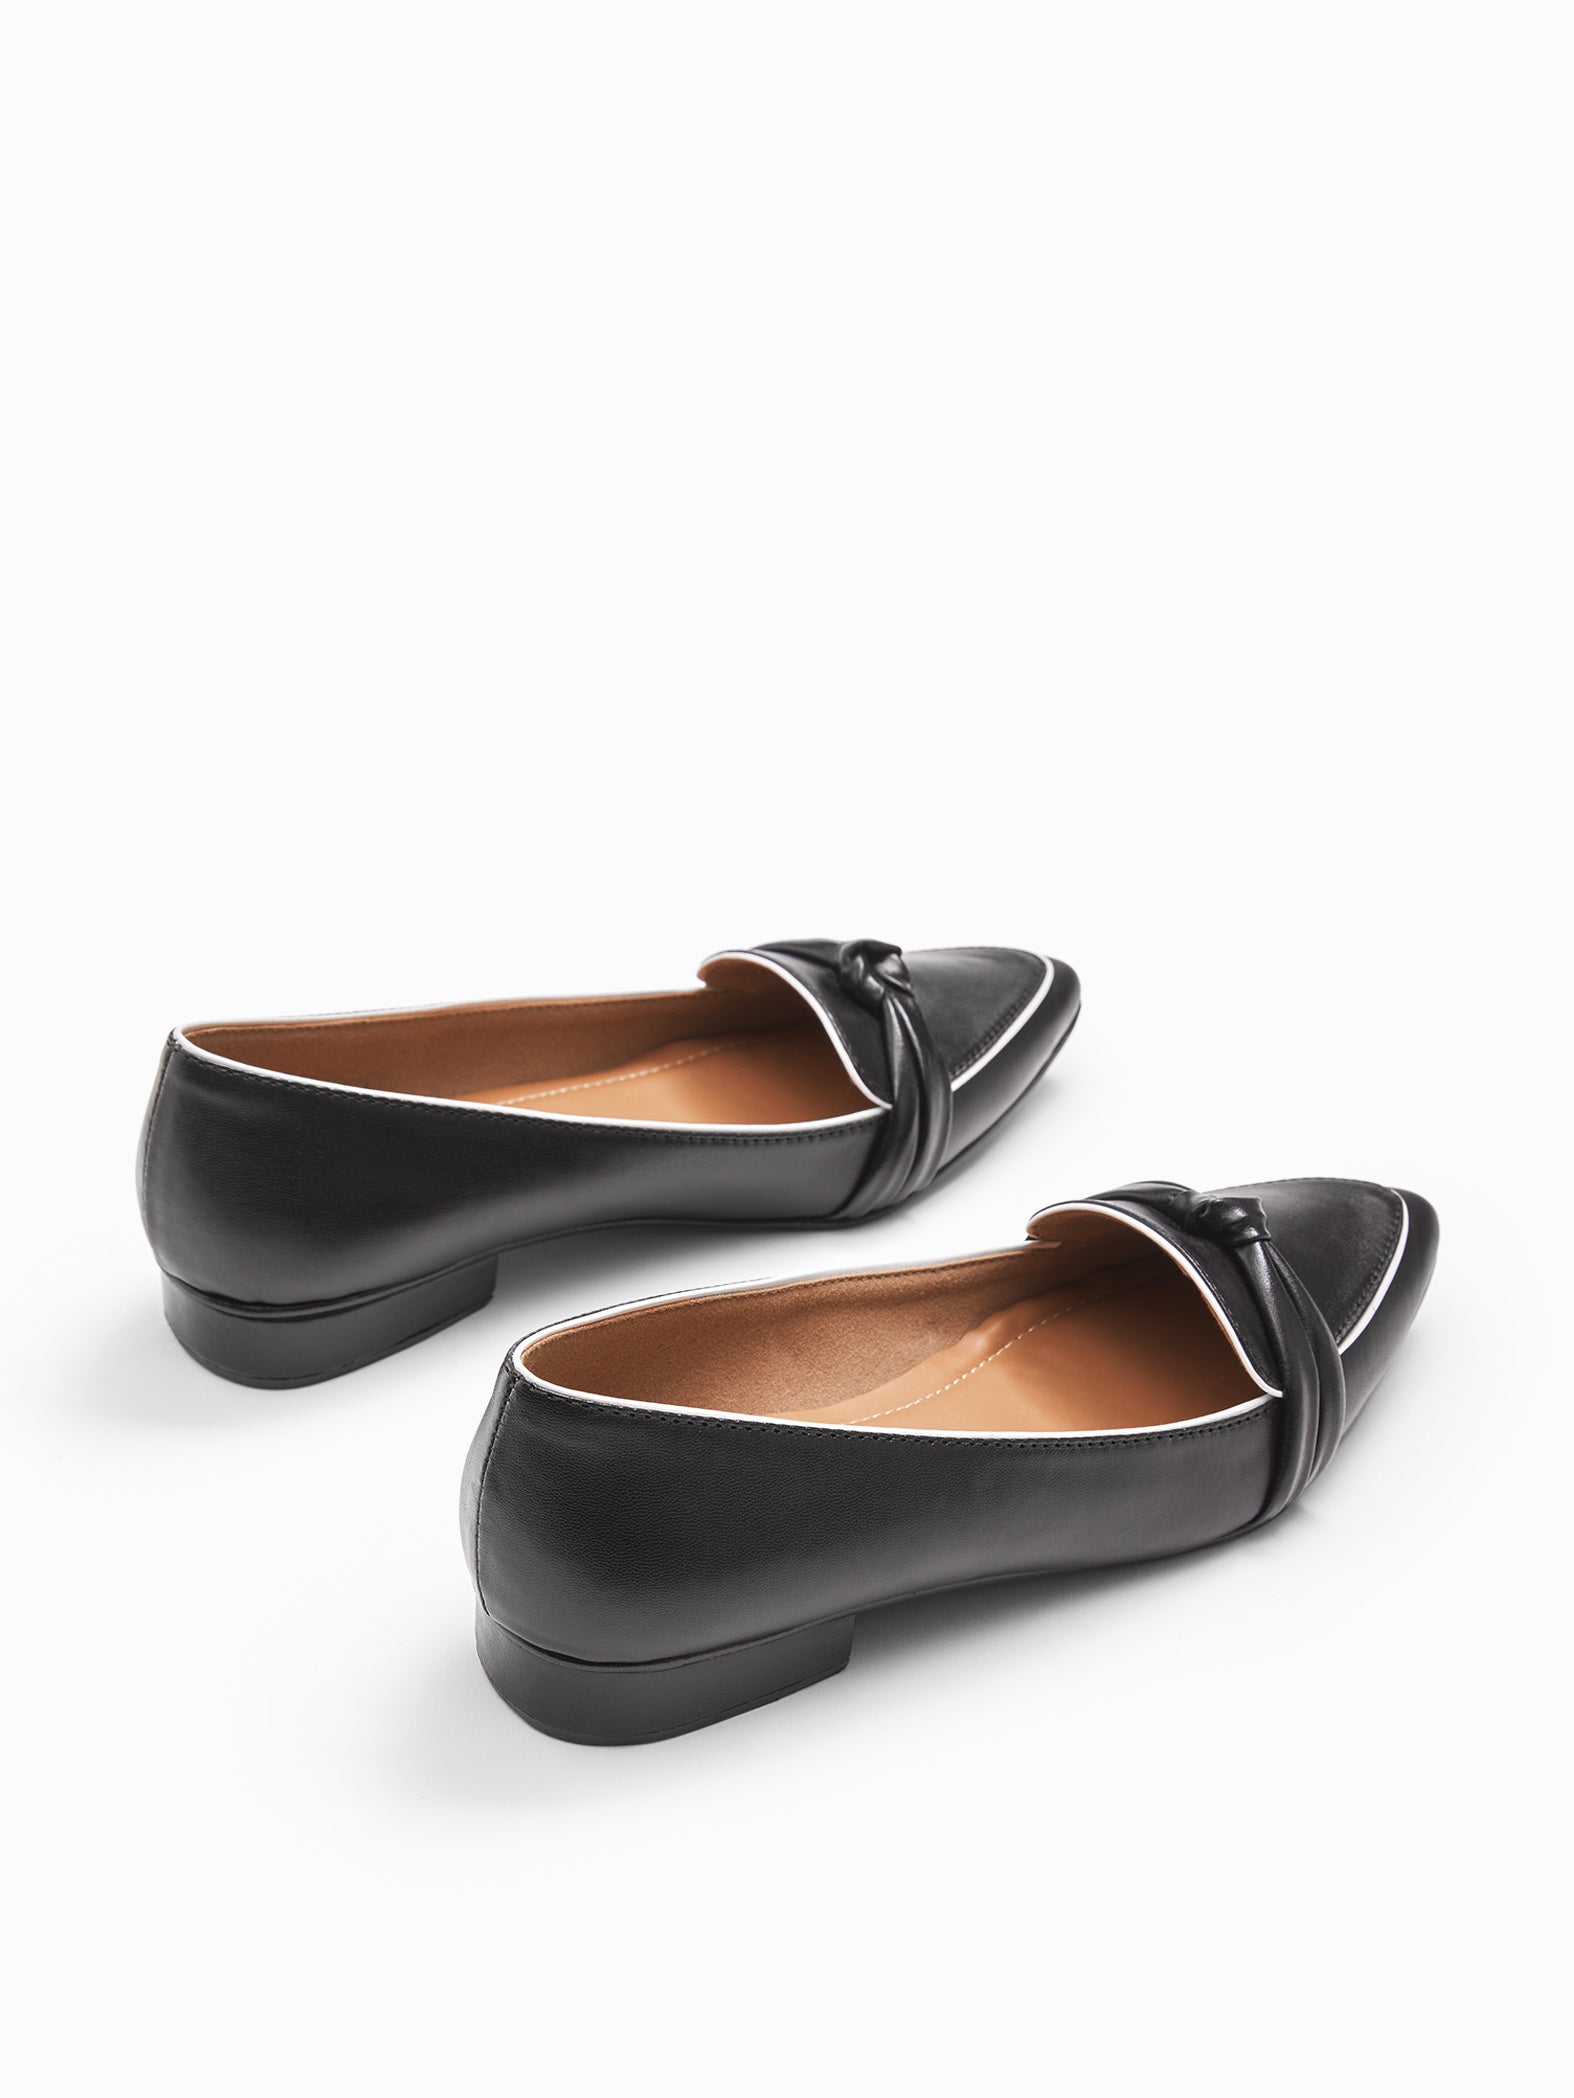 Monochrome knotted loafers